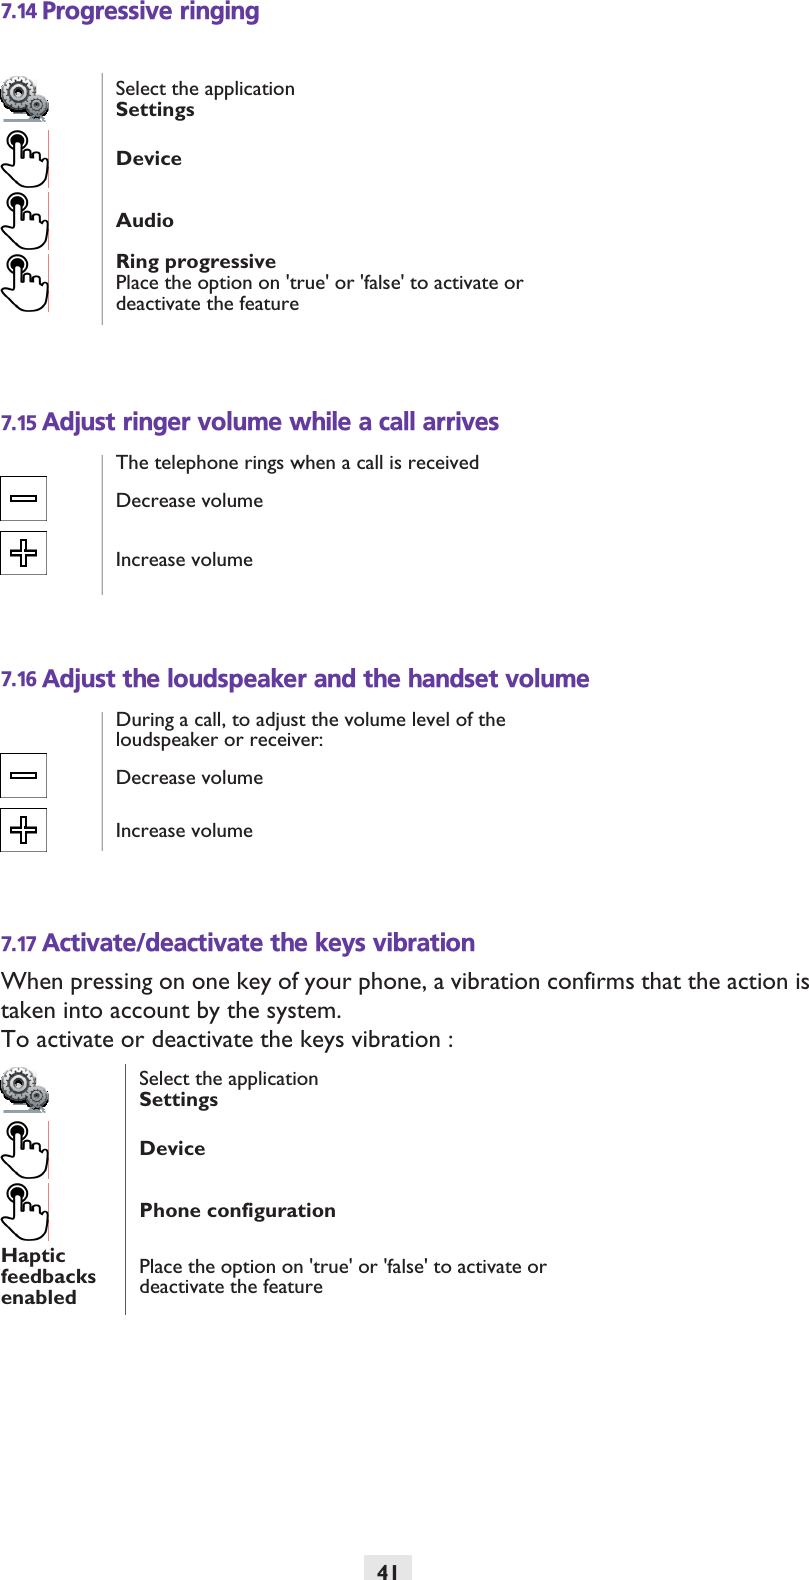 417.14 Progressive ringing7.15 Adjust ringer volume while a call arrives7.16 Adjust the loudspeaker and the handset volume7.17 Activate/deactivate the keys vibrationWhen pressing on one key of your phone, a vibration confirms that the action is taken into account by the system.To activate or deactivate the keys vibration :Select the applicationSettingsDeviceAudioRing progressivePlace the option on &apos;true&apos; or &apos;false&apos; to activate or deactivate the featureThe telephone rings when a call is receivedDecrease volumeIncrease volumeDuring a call, to adjust the volume level of the loudspeaker or receiver:Decrease volumeIncrease volumeSelect the applicationSettingsDevicePhone configurationHaptic feedbacks enabledPlace the option on &apos;true&apos; or &apos;false&apos; to activate or deactivate the feature